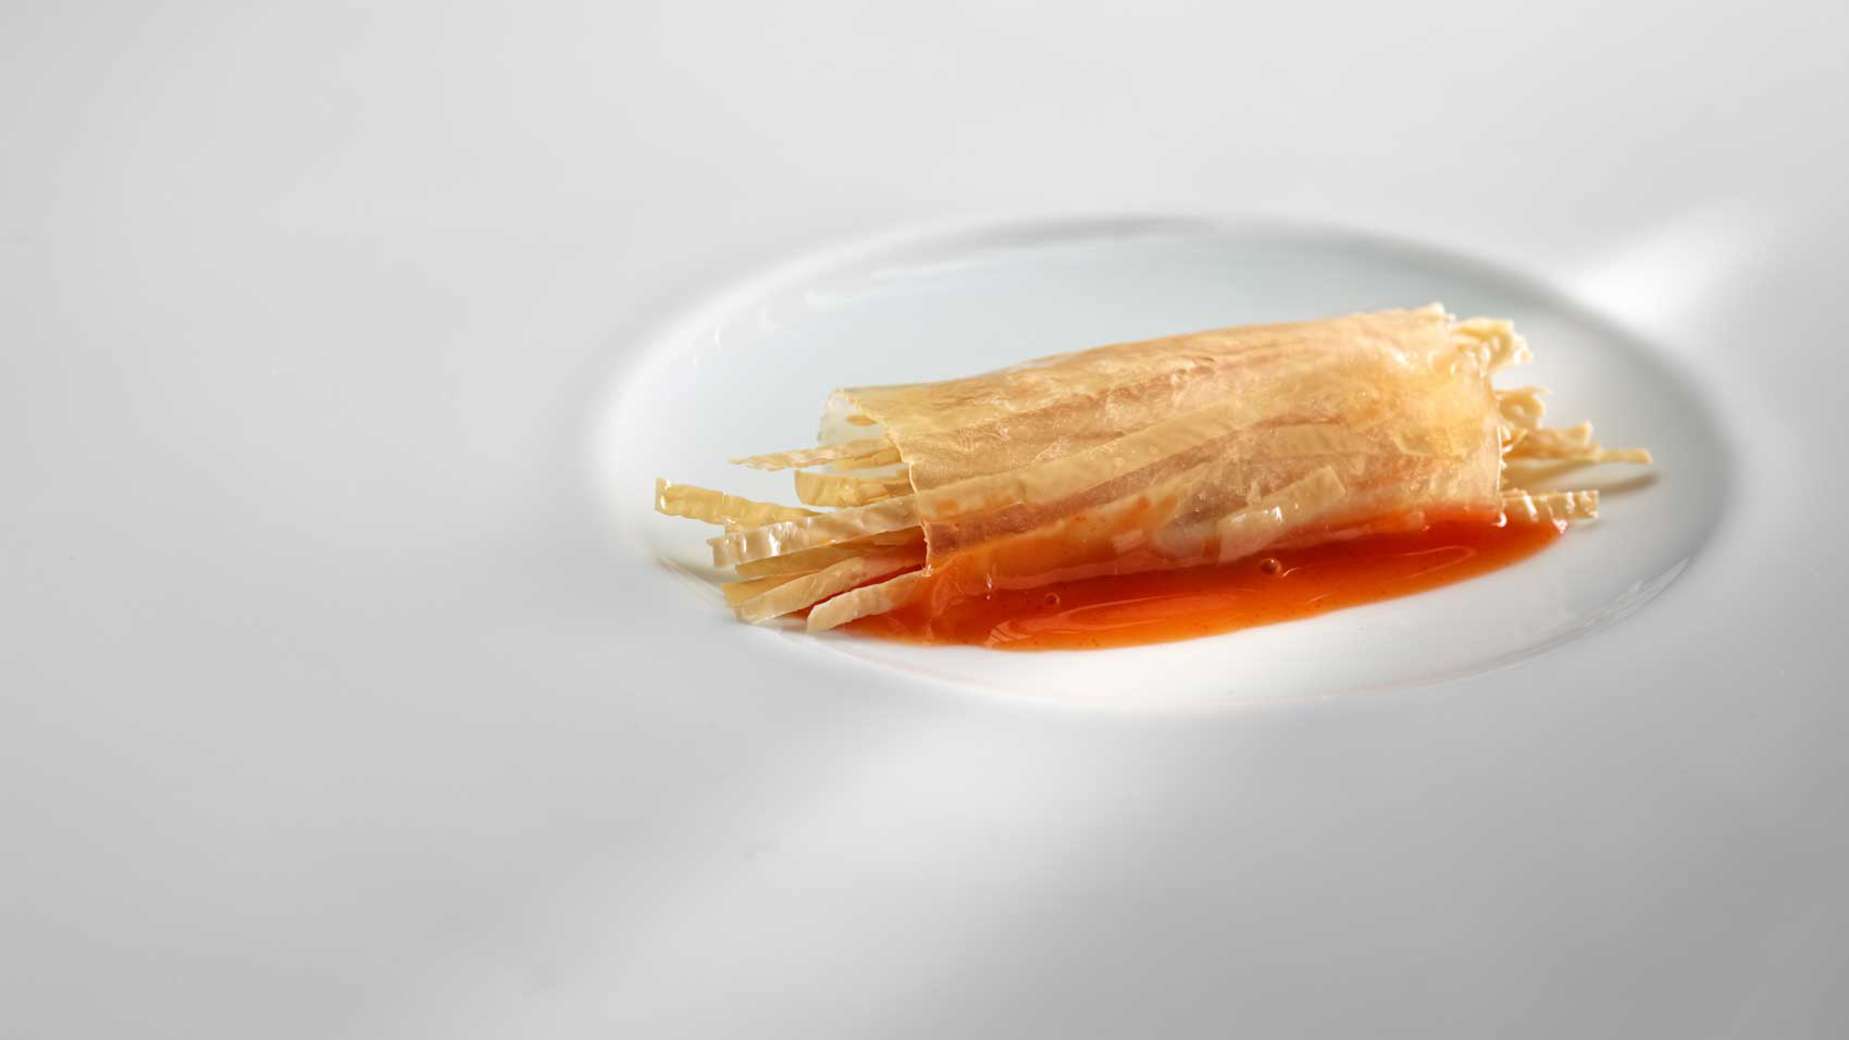 Tagliatelle of concentrated milk lightly soaked in a silky juice of roasted squash and tomato.
PHOTO: José Luis López de Zubiría / Mugaritz